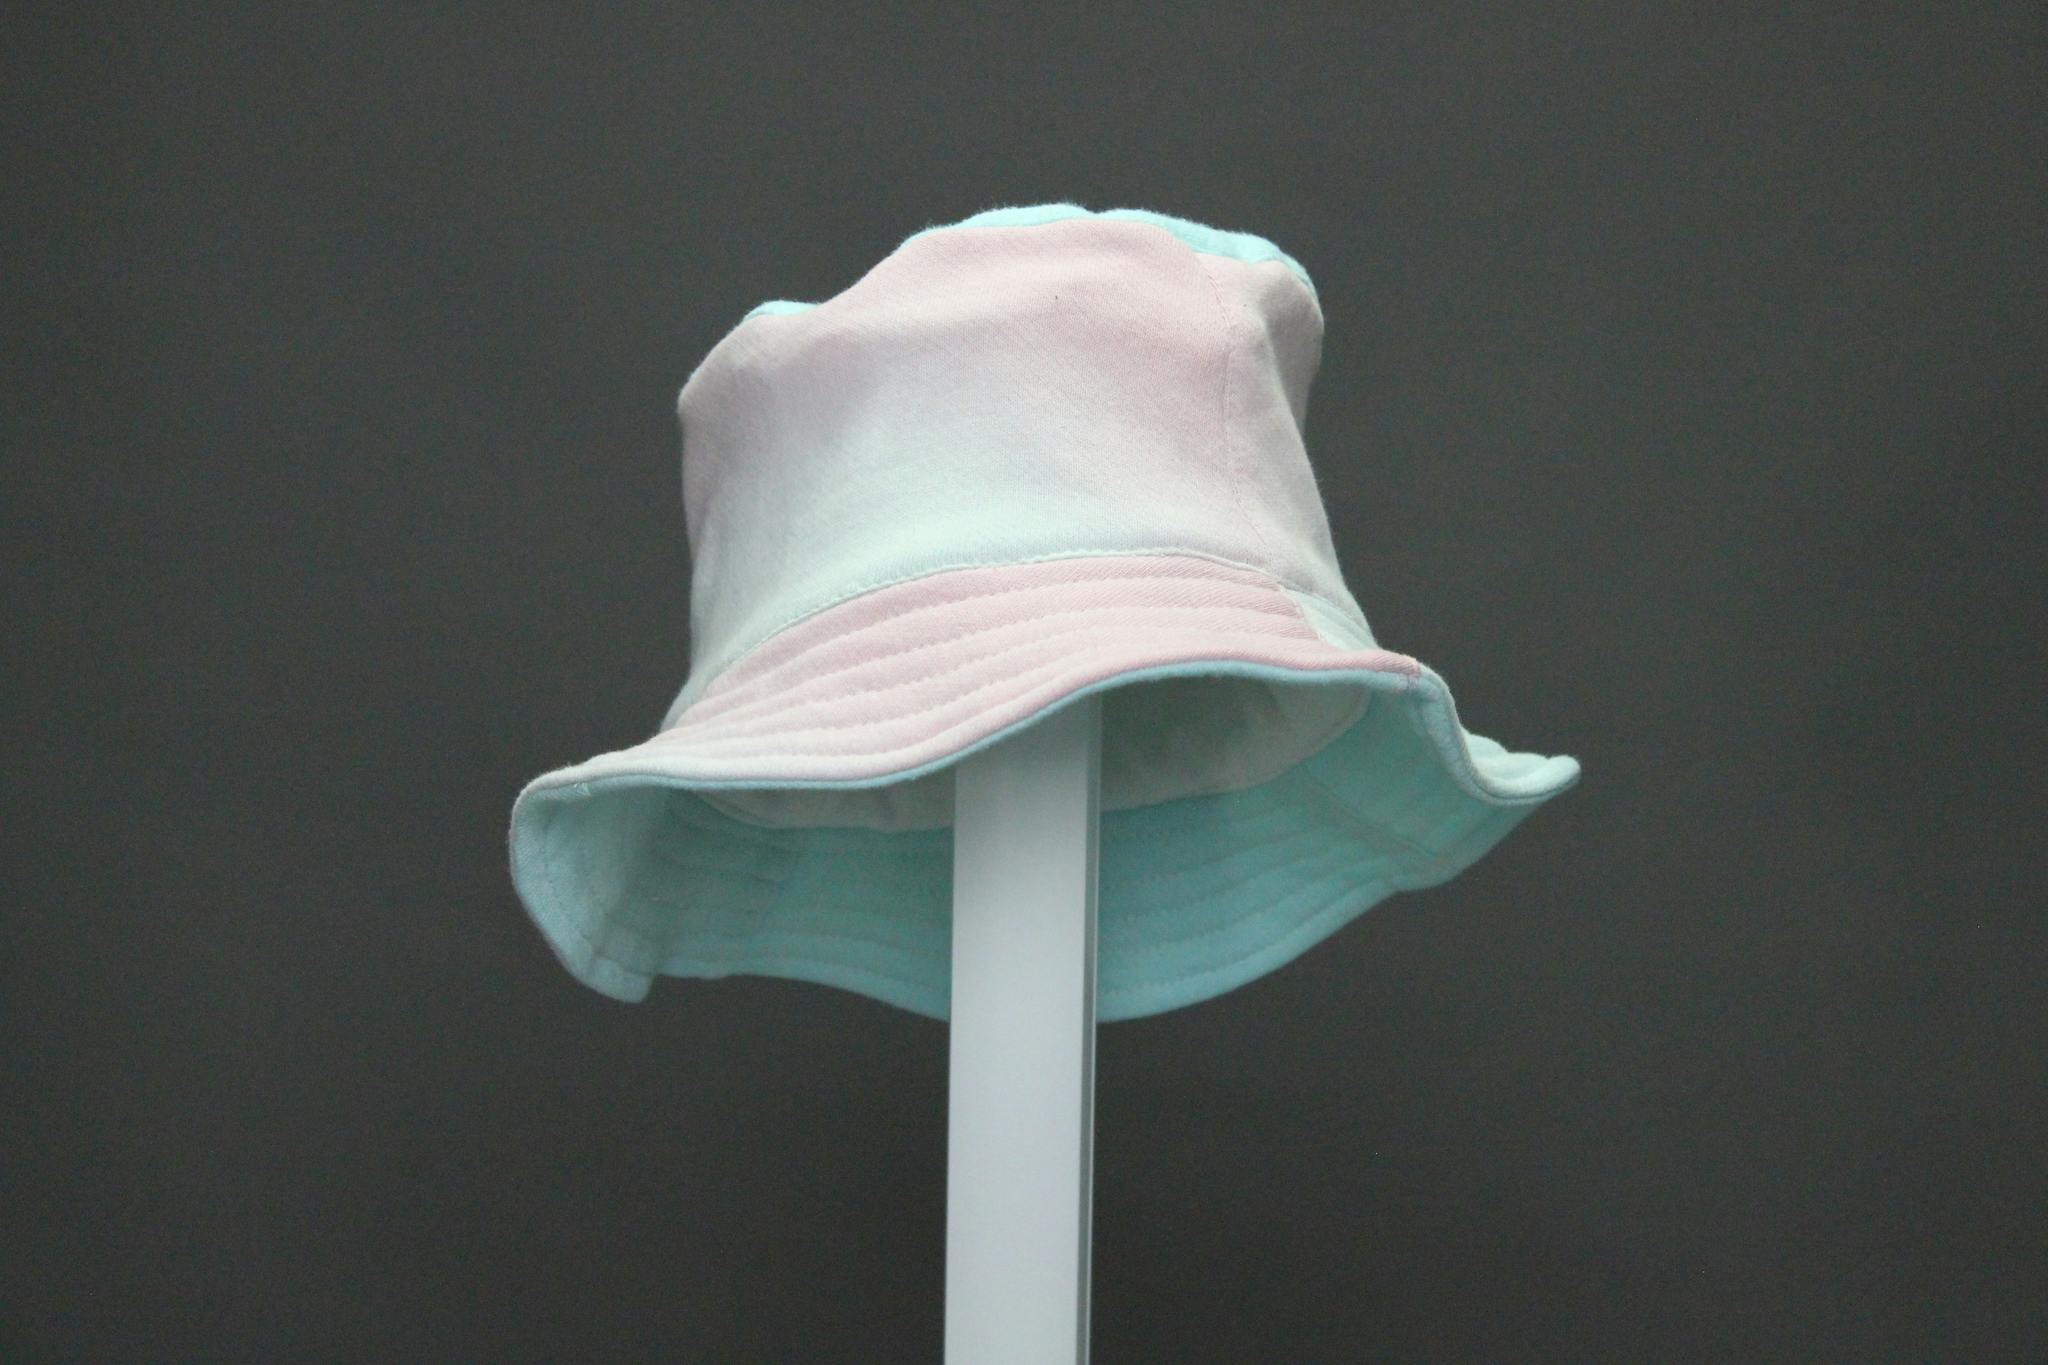 Cotton Candy hat!